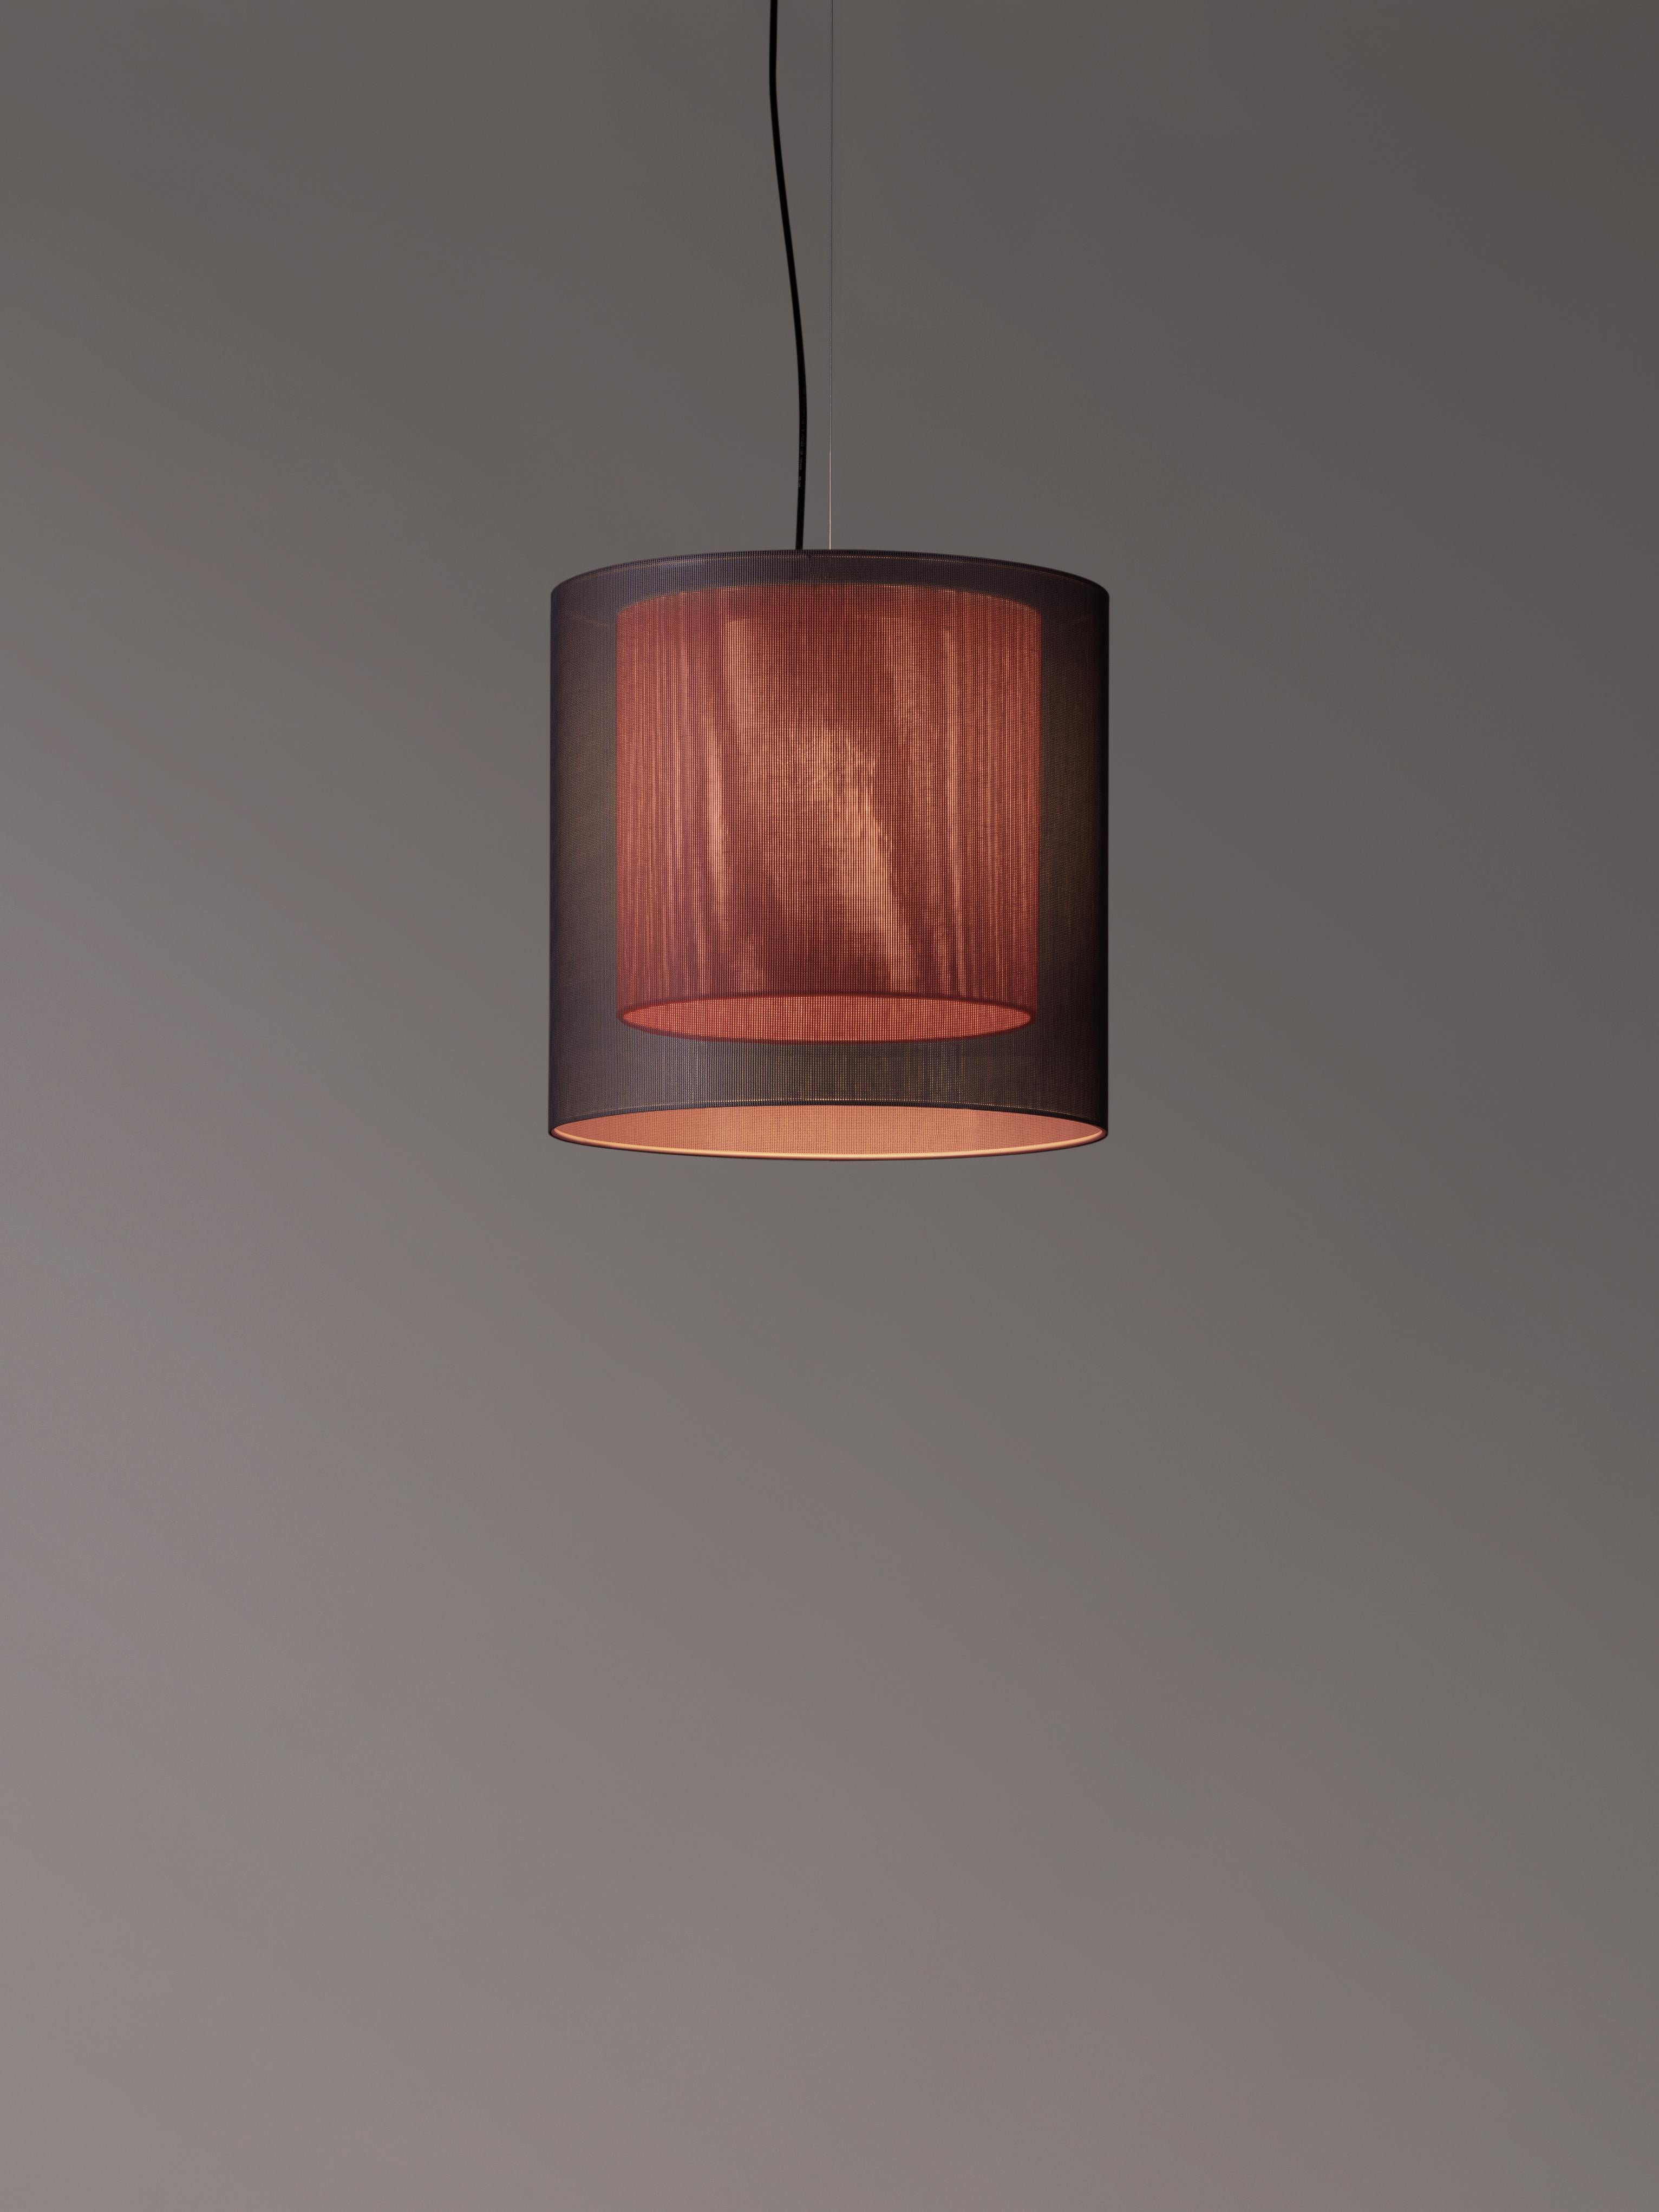 Grey and red Moaré MS pendant lamp by Antoni Arola
Dimensions: D 46 x H 45 cm
Materials: Metal, polyester.
Available in other colors and sizes.

Moaré’s multiple combinations of formats and colours make it highly versatile. The series takes its